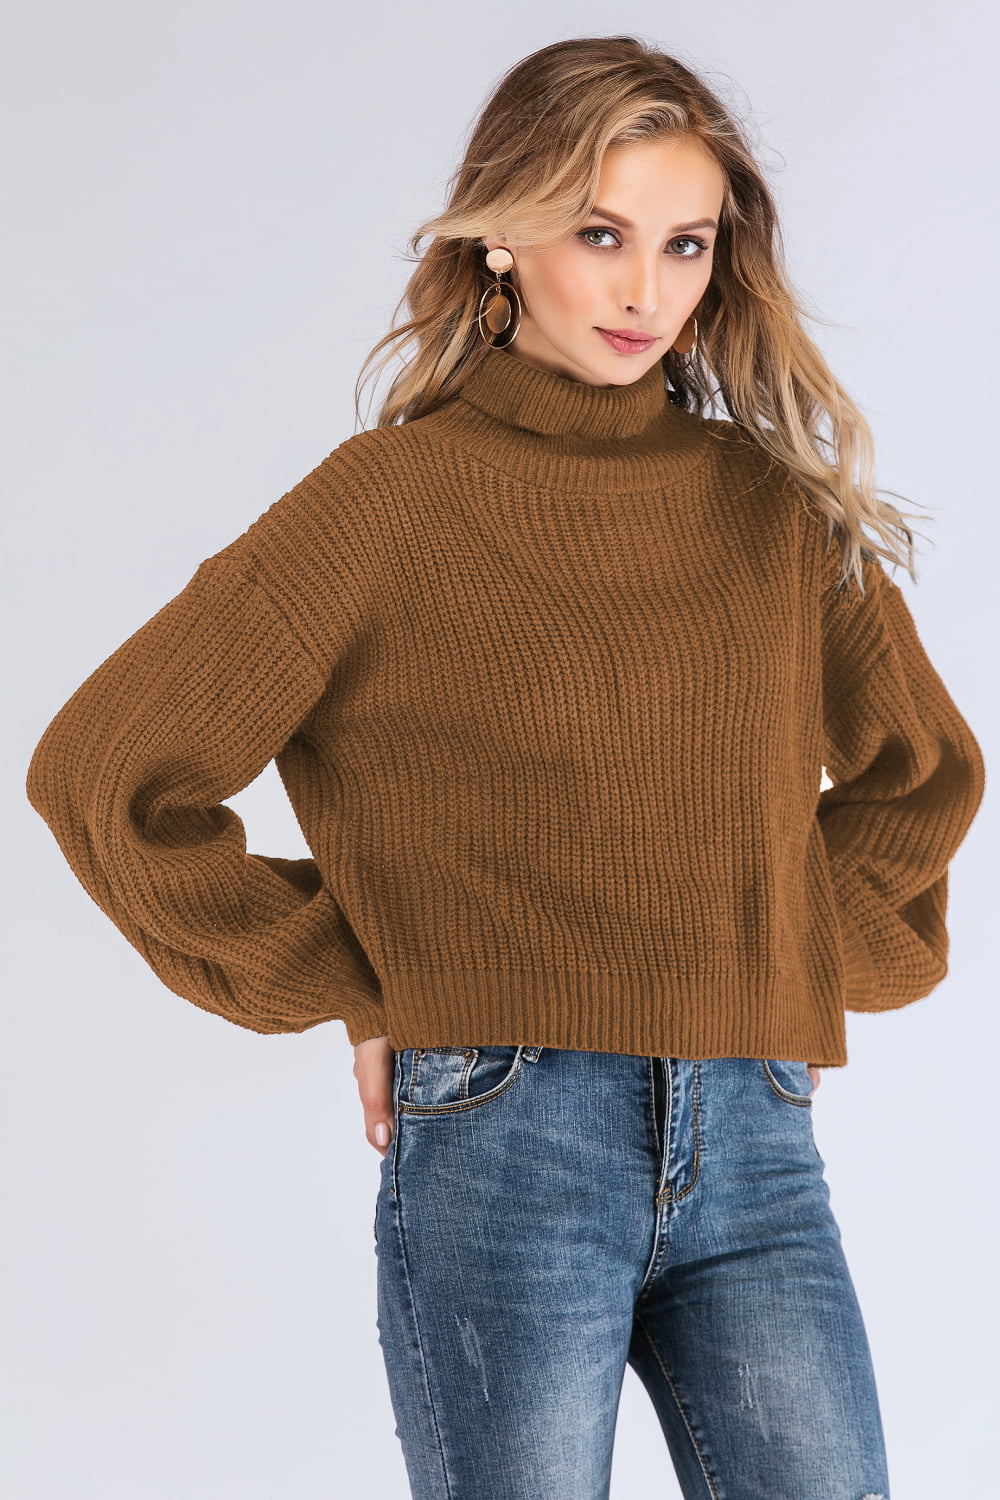 Saddle Brown Double Take Turtleneck Rib-Knit Dropped Shoulder Sweater Sentient Beauty Fashions Apparel & Accessories